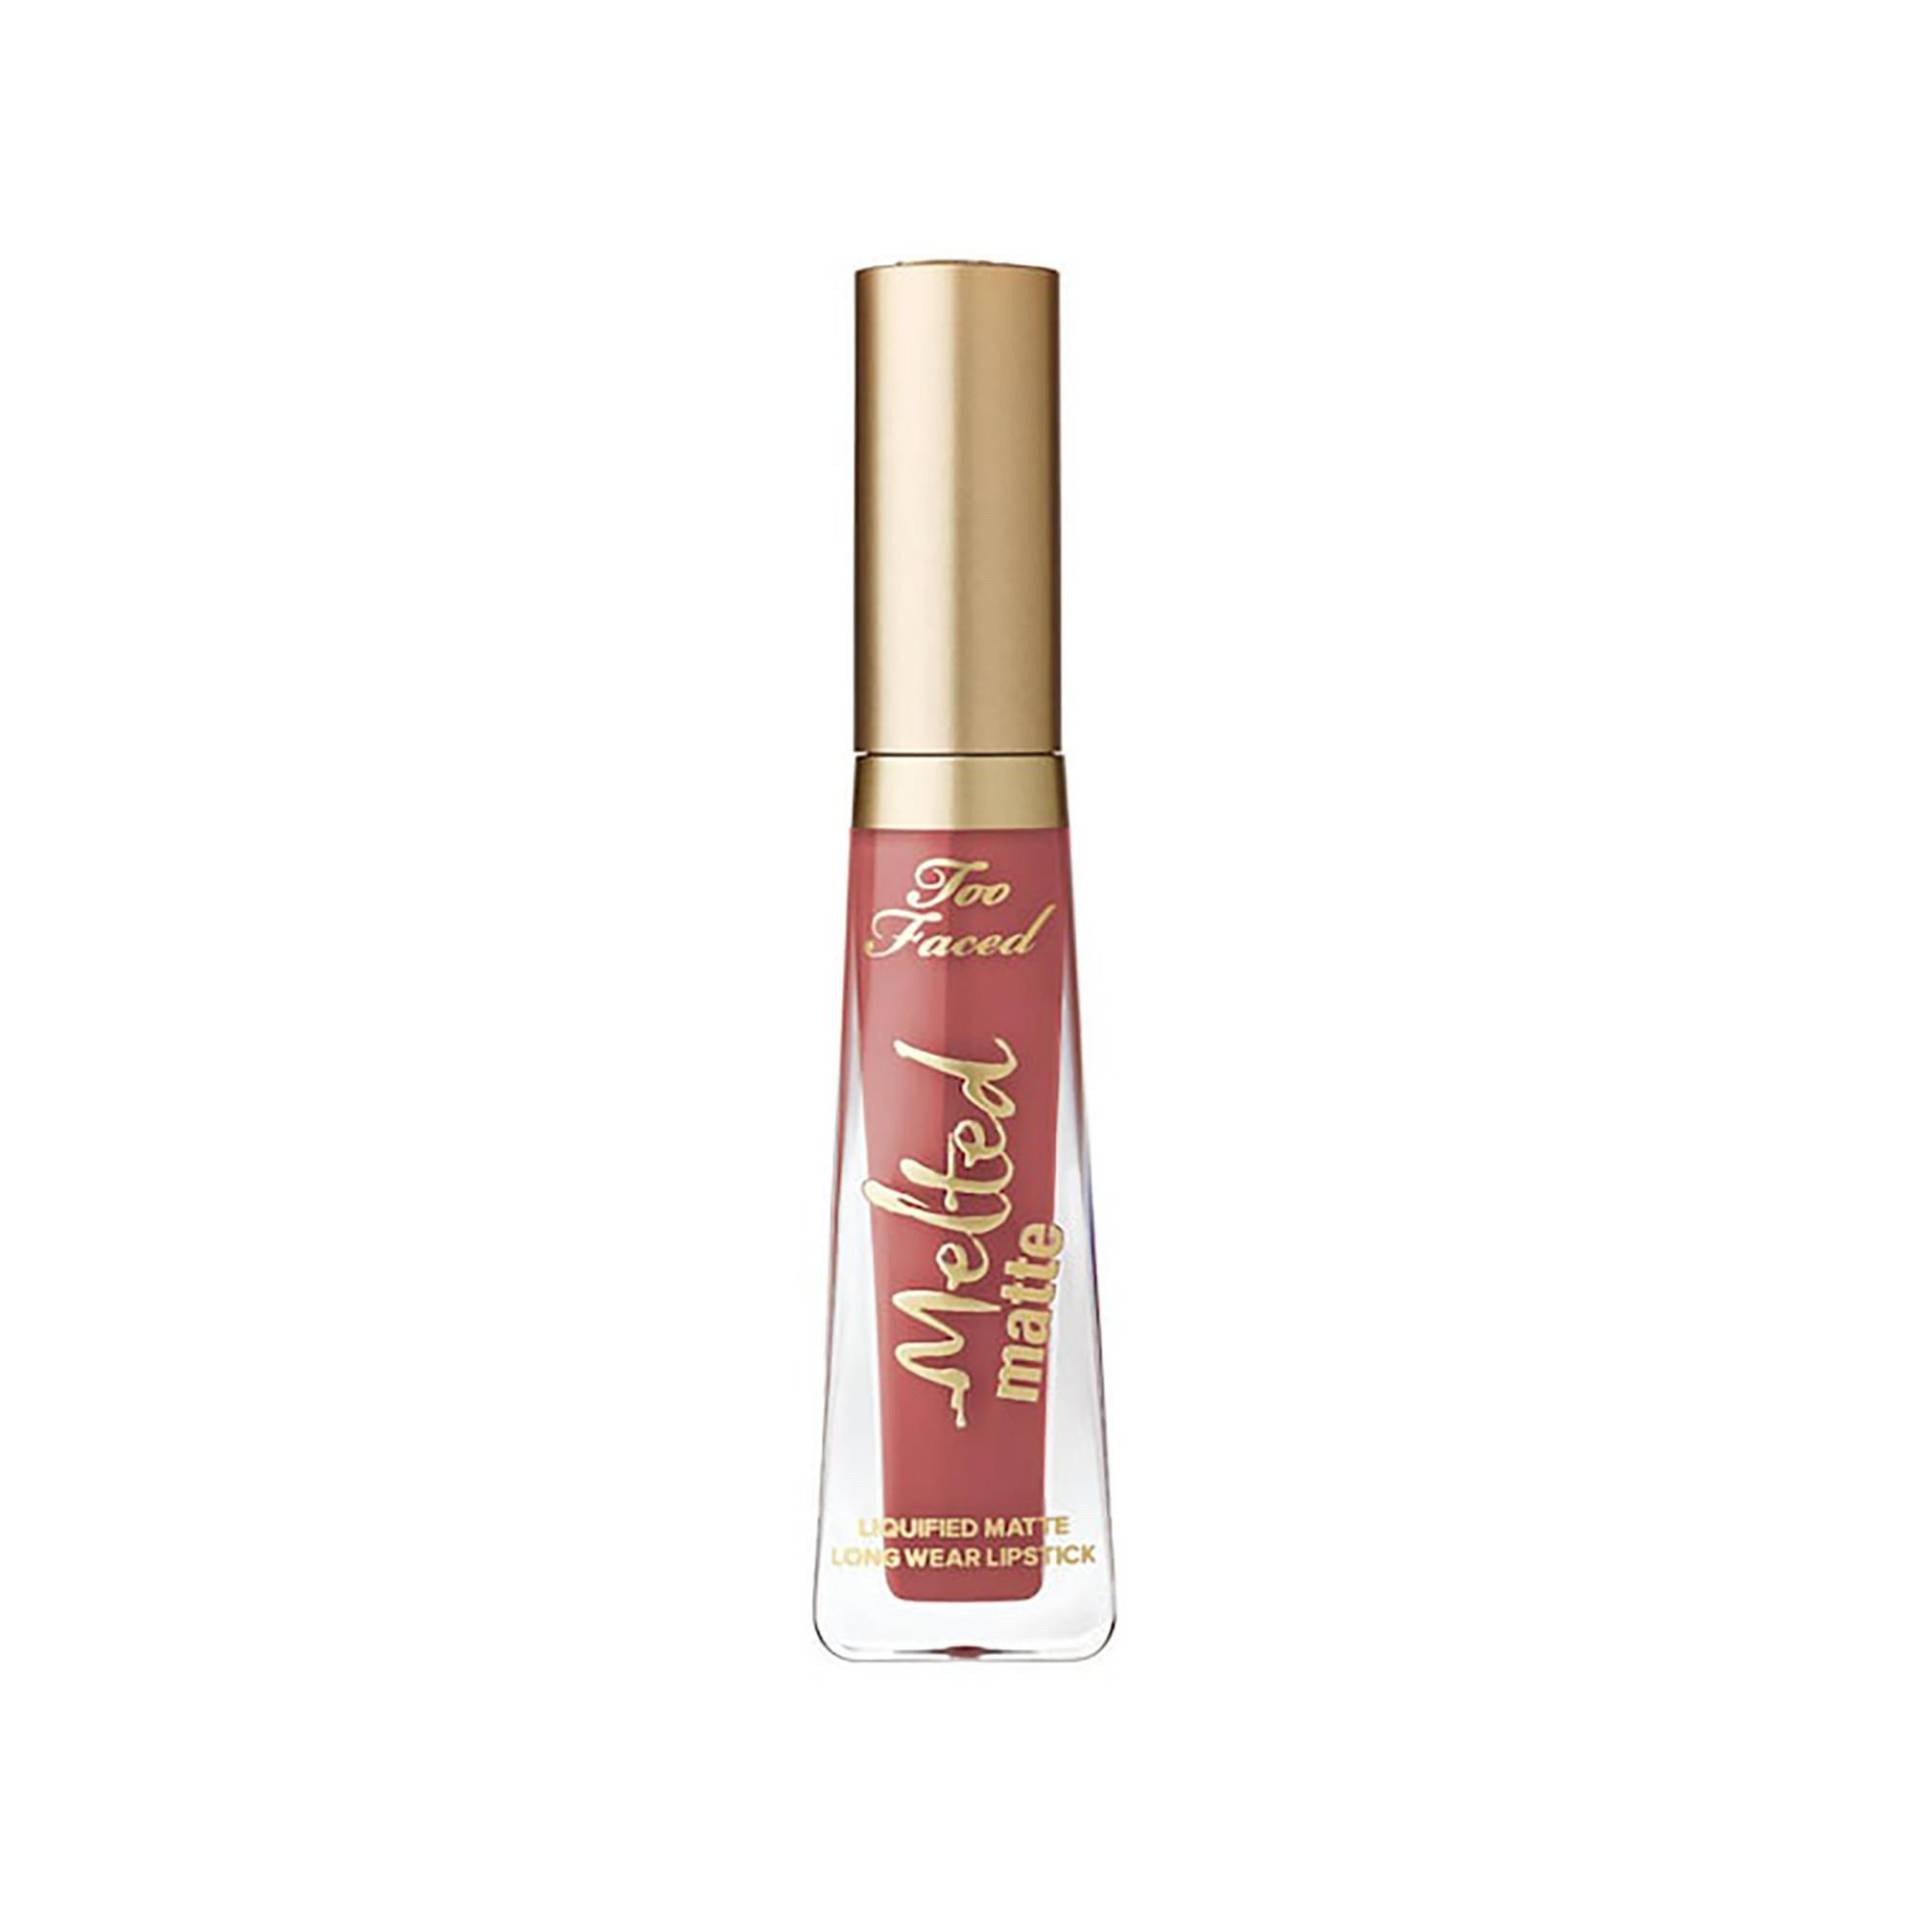 Base-p0-594547 Damen Sell Out 12ml von Too Faced